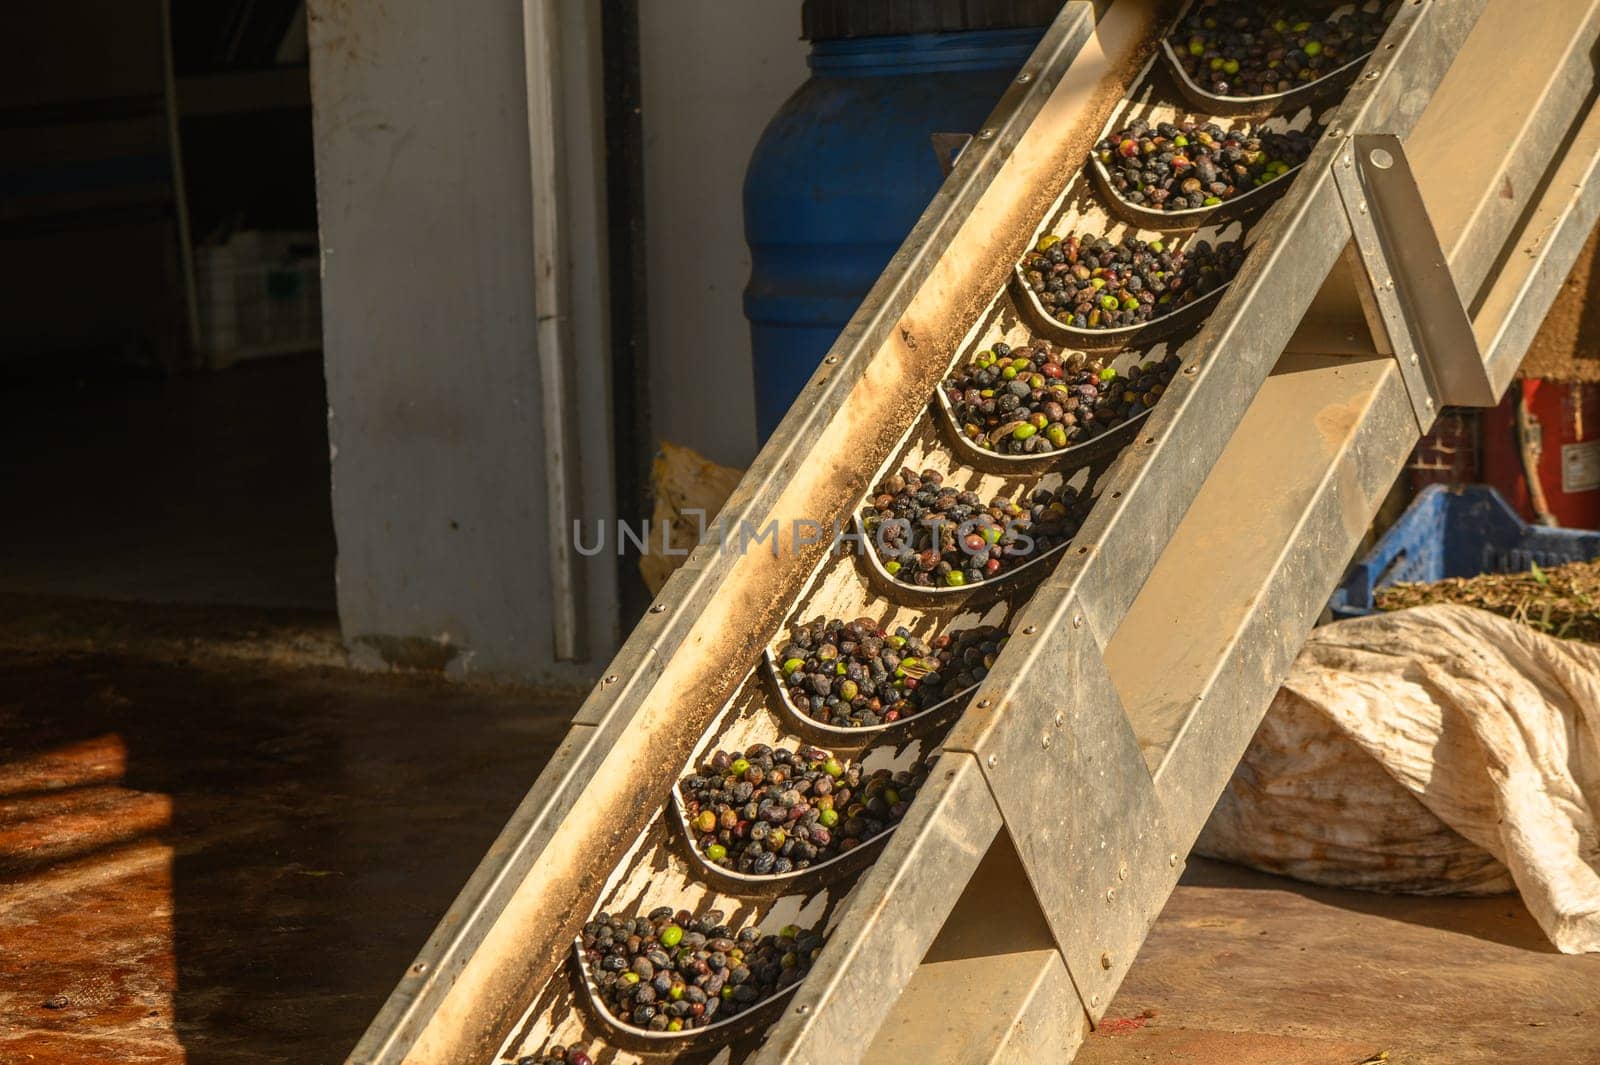 olives are transported from a bunker to an olive oil pressing plant 1 by Mixa74